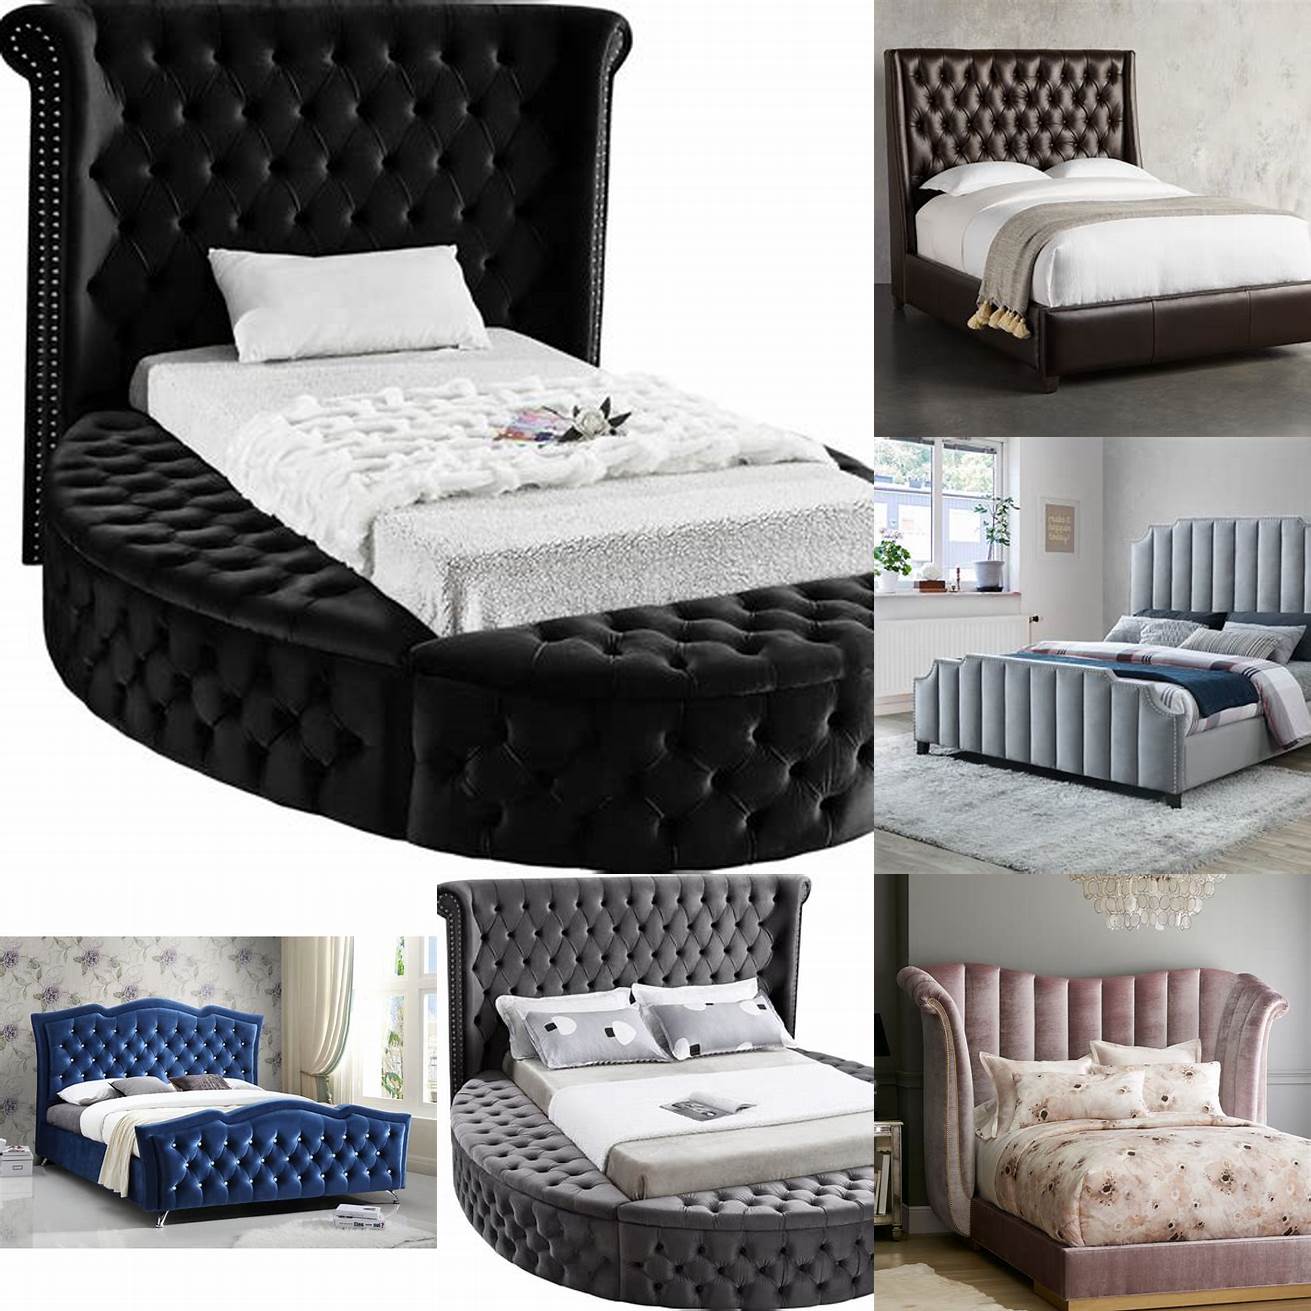 Price Tufted beds are usually more expensive than regular beds especially if they are made of high-end materials such as leather or velvet